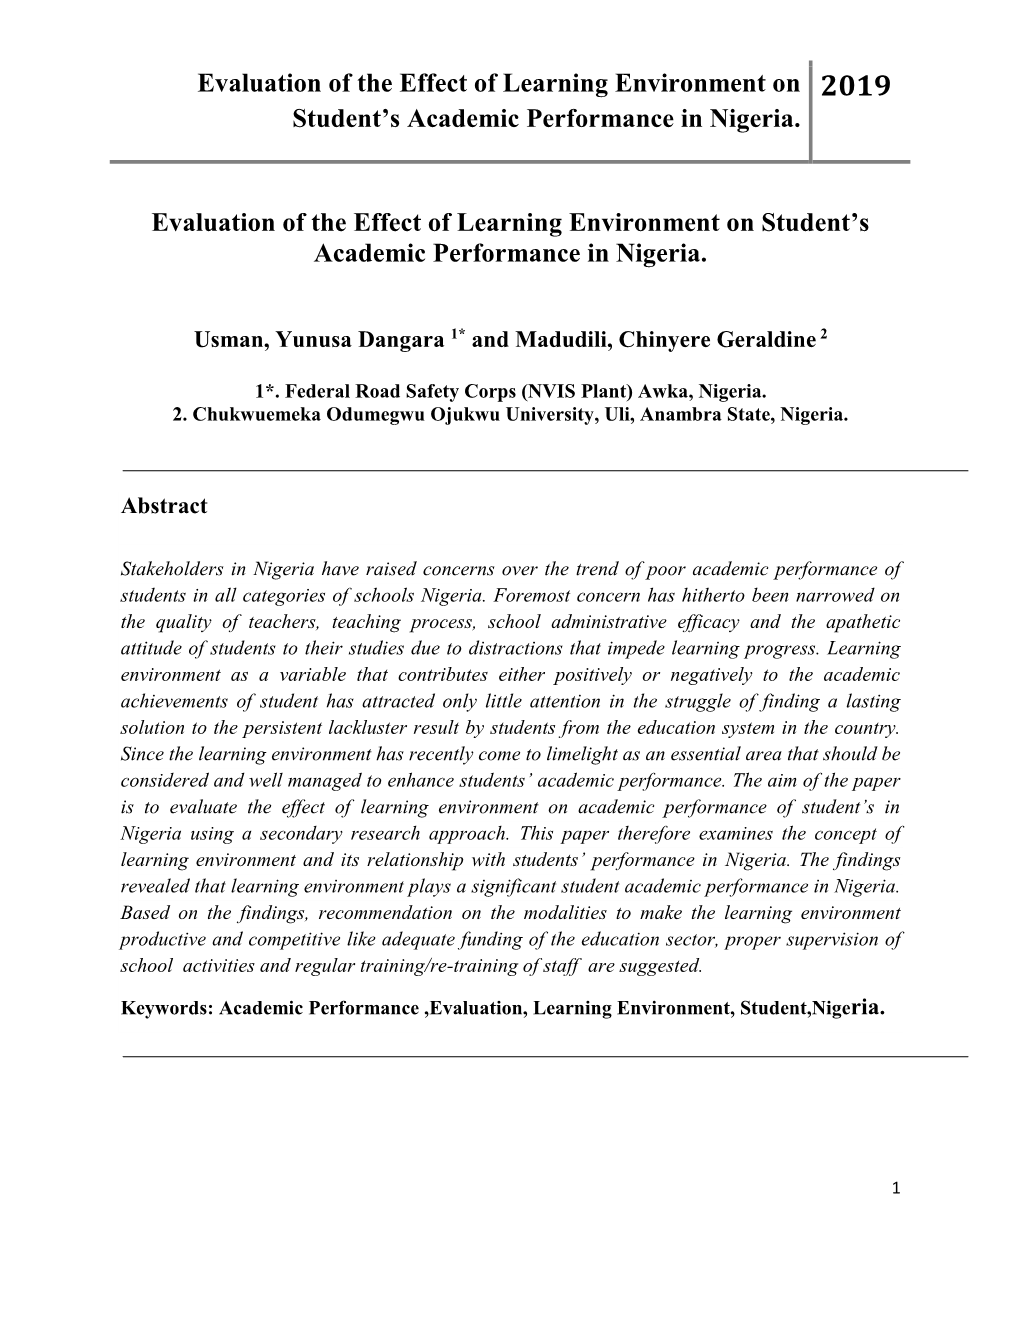 Evaluation of the Effect of Learning Environment on Student's